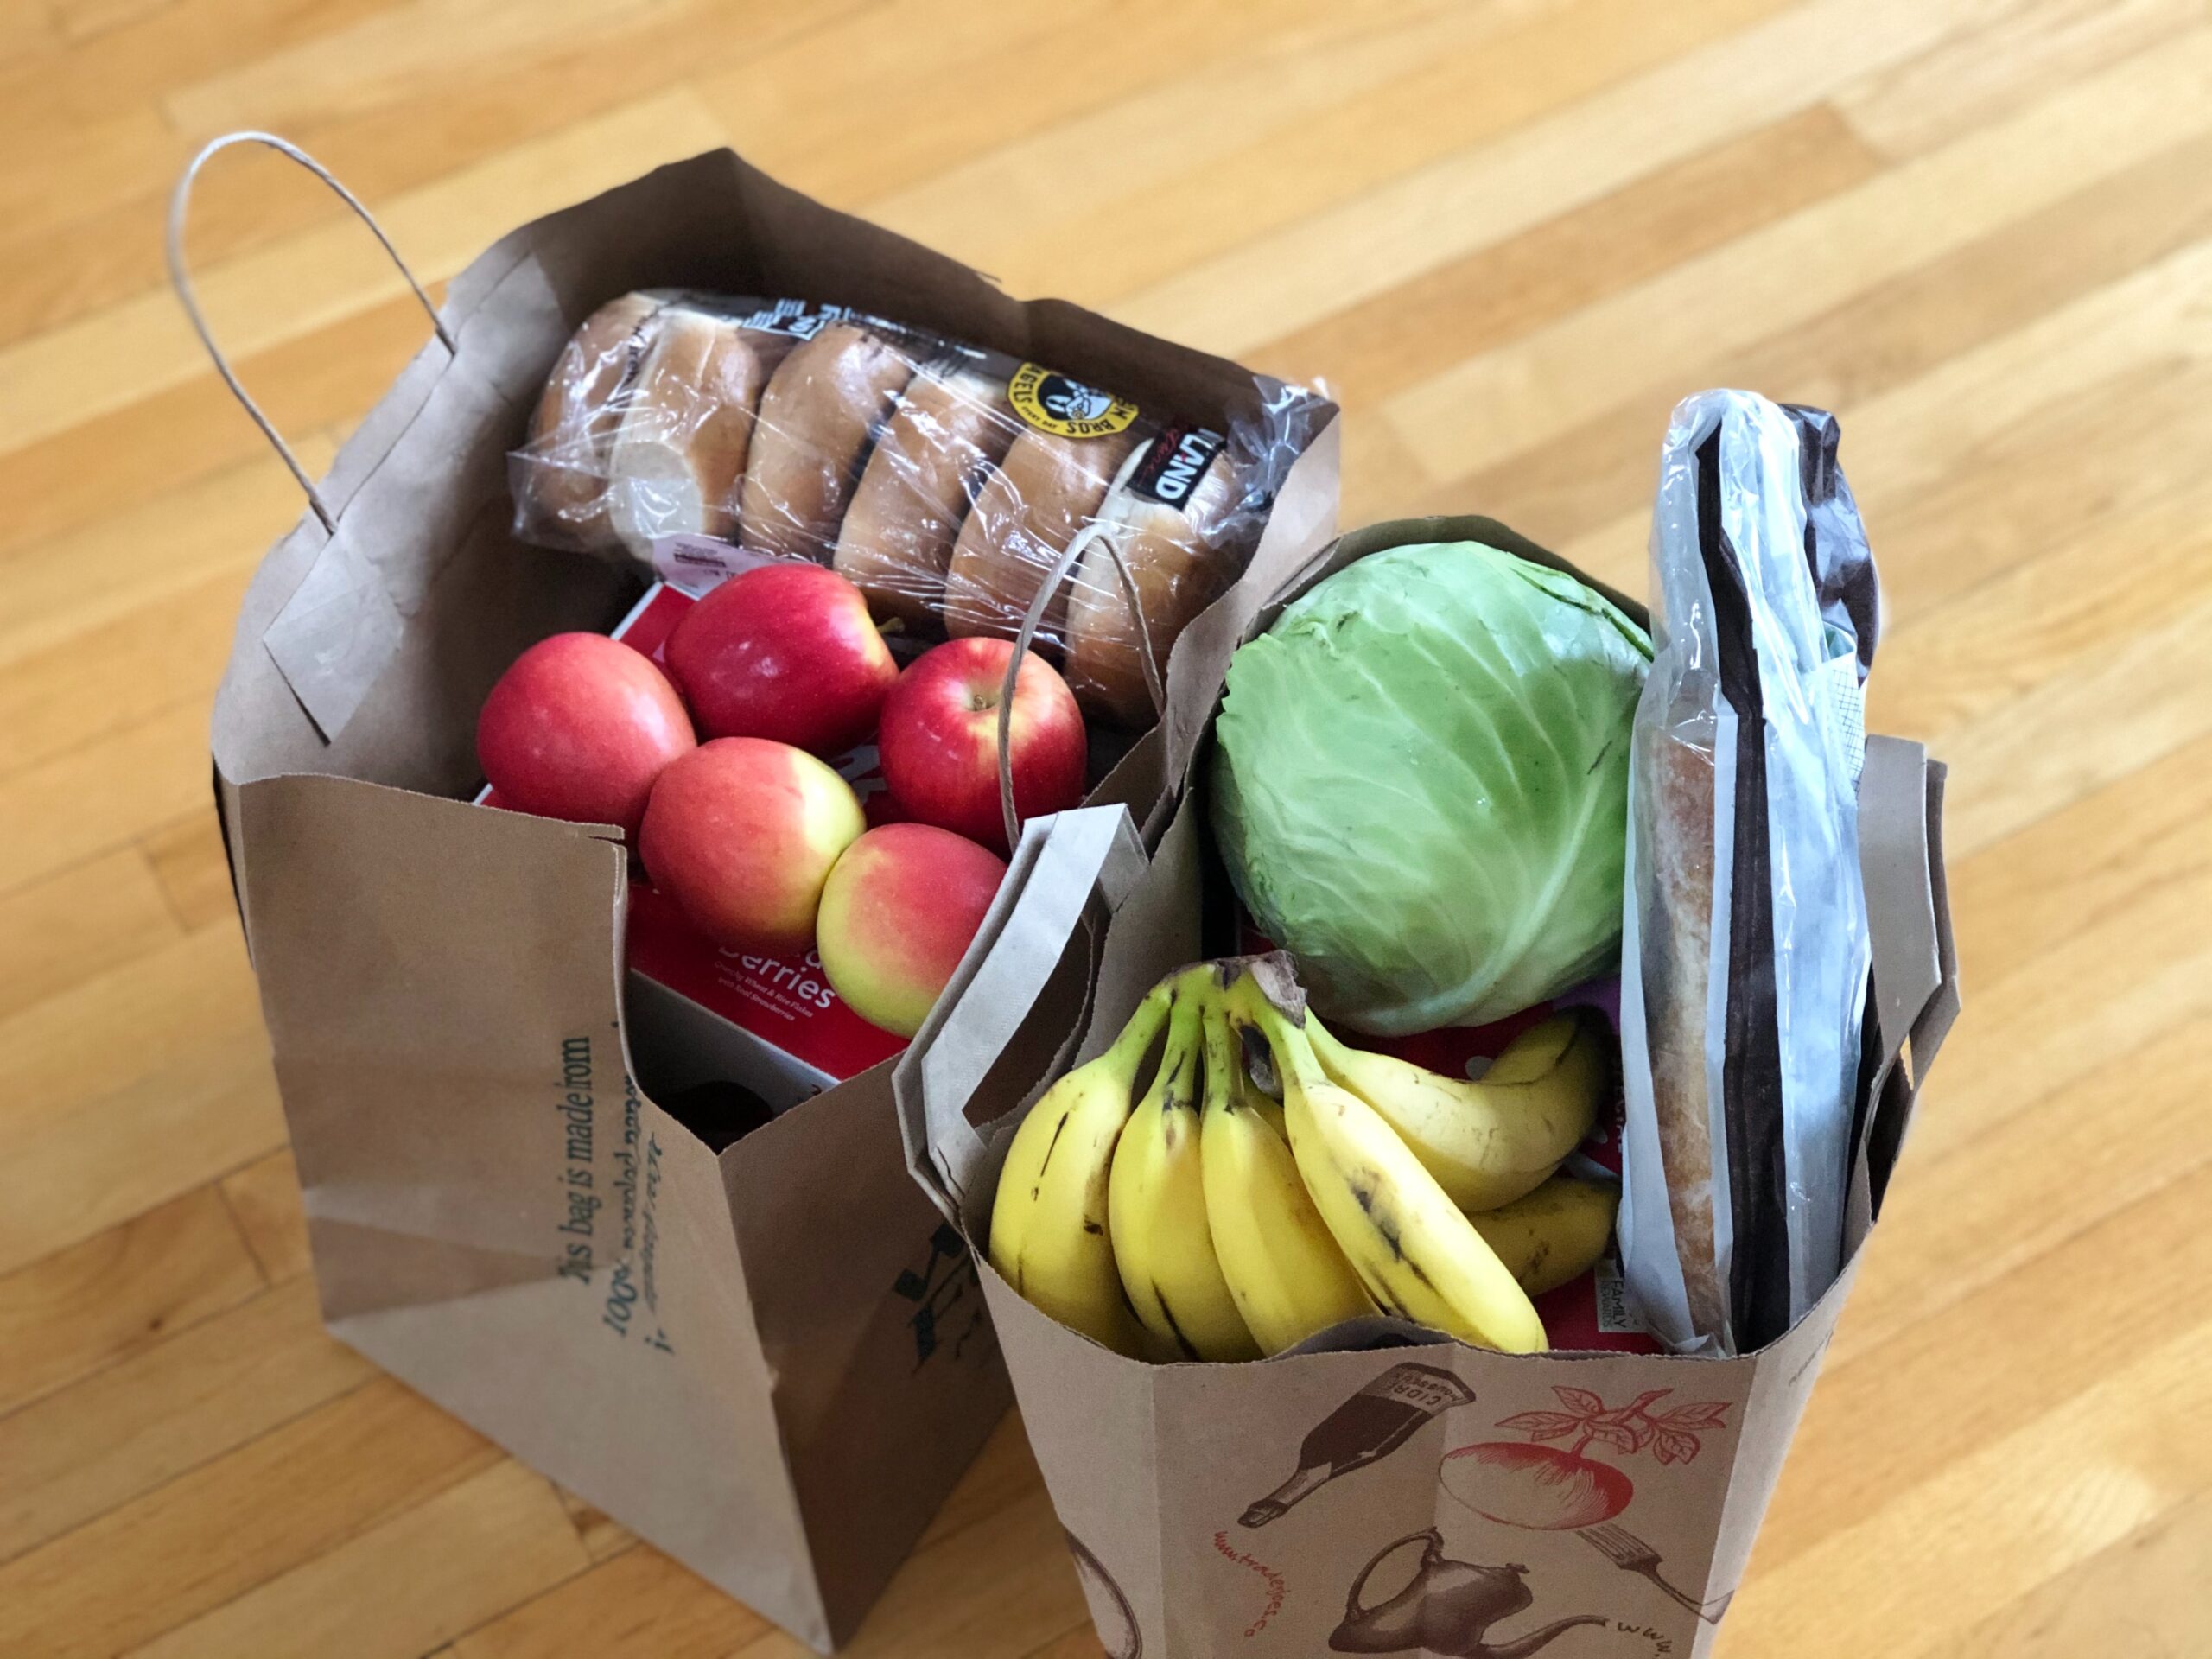 bag of groceries in paper bags on wooden floor to accompany a plant based grocery list